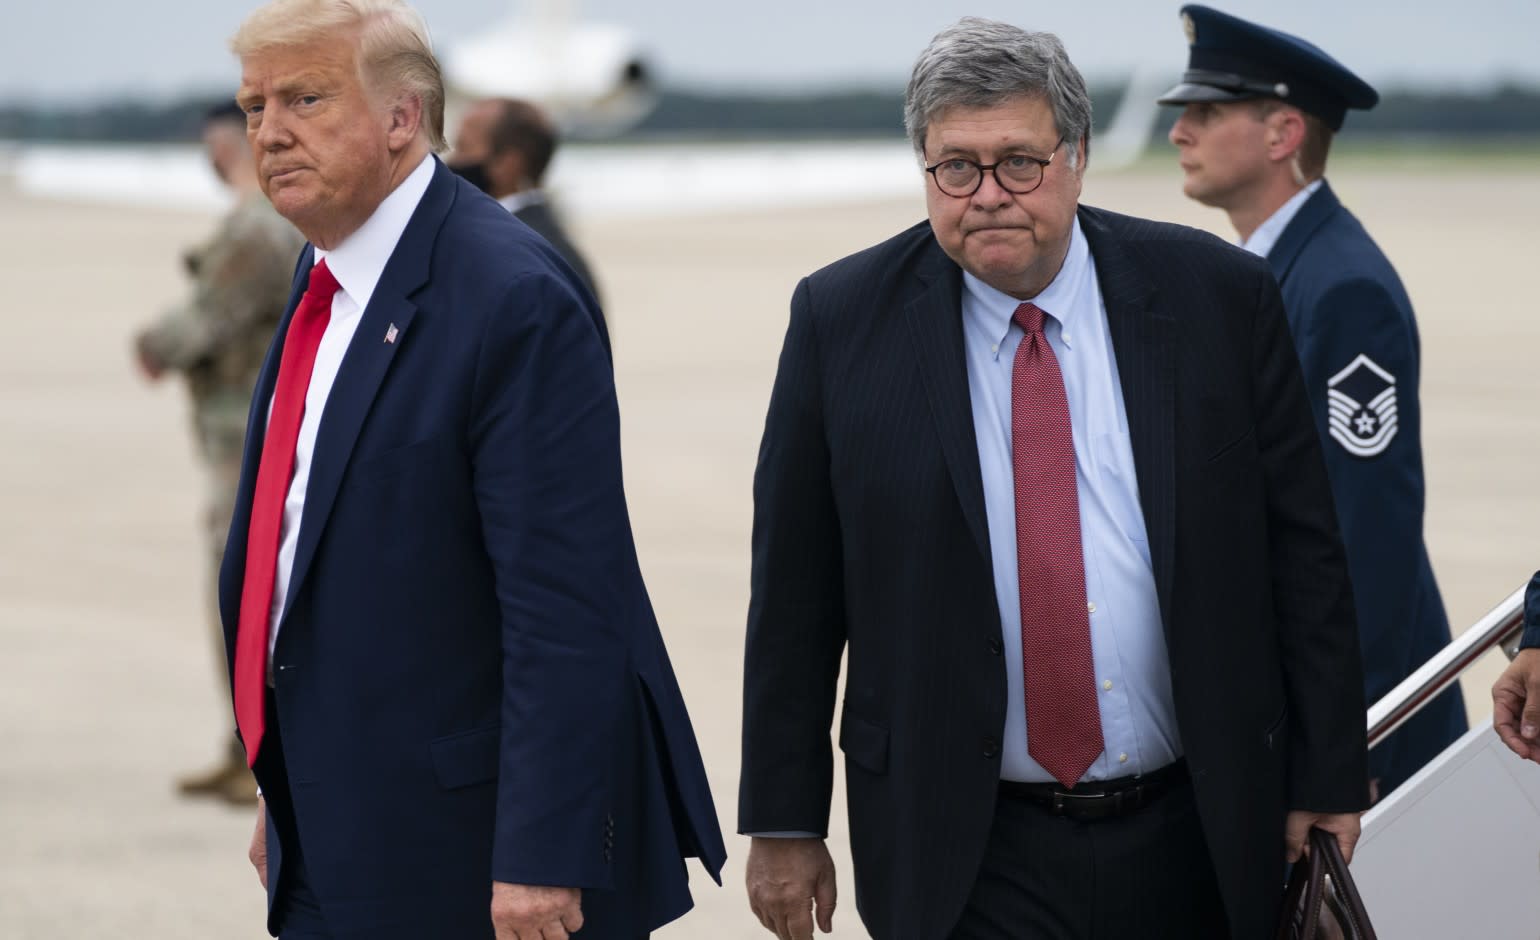 Barr warned Trump he'd lose election because suburban voters think he's a 'f***ing a**hole', book says